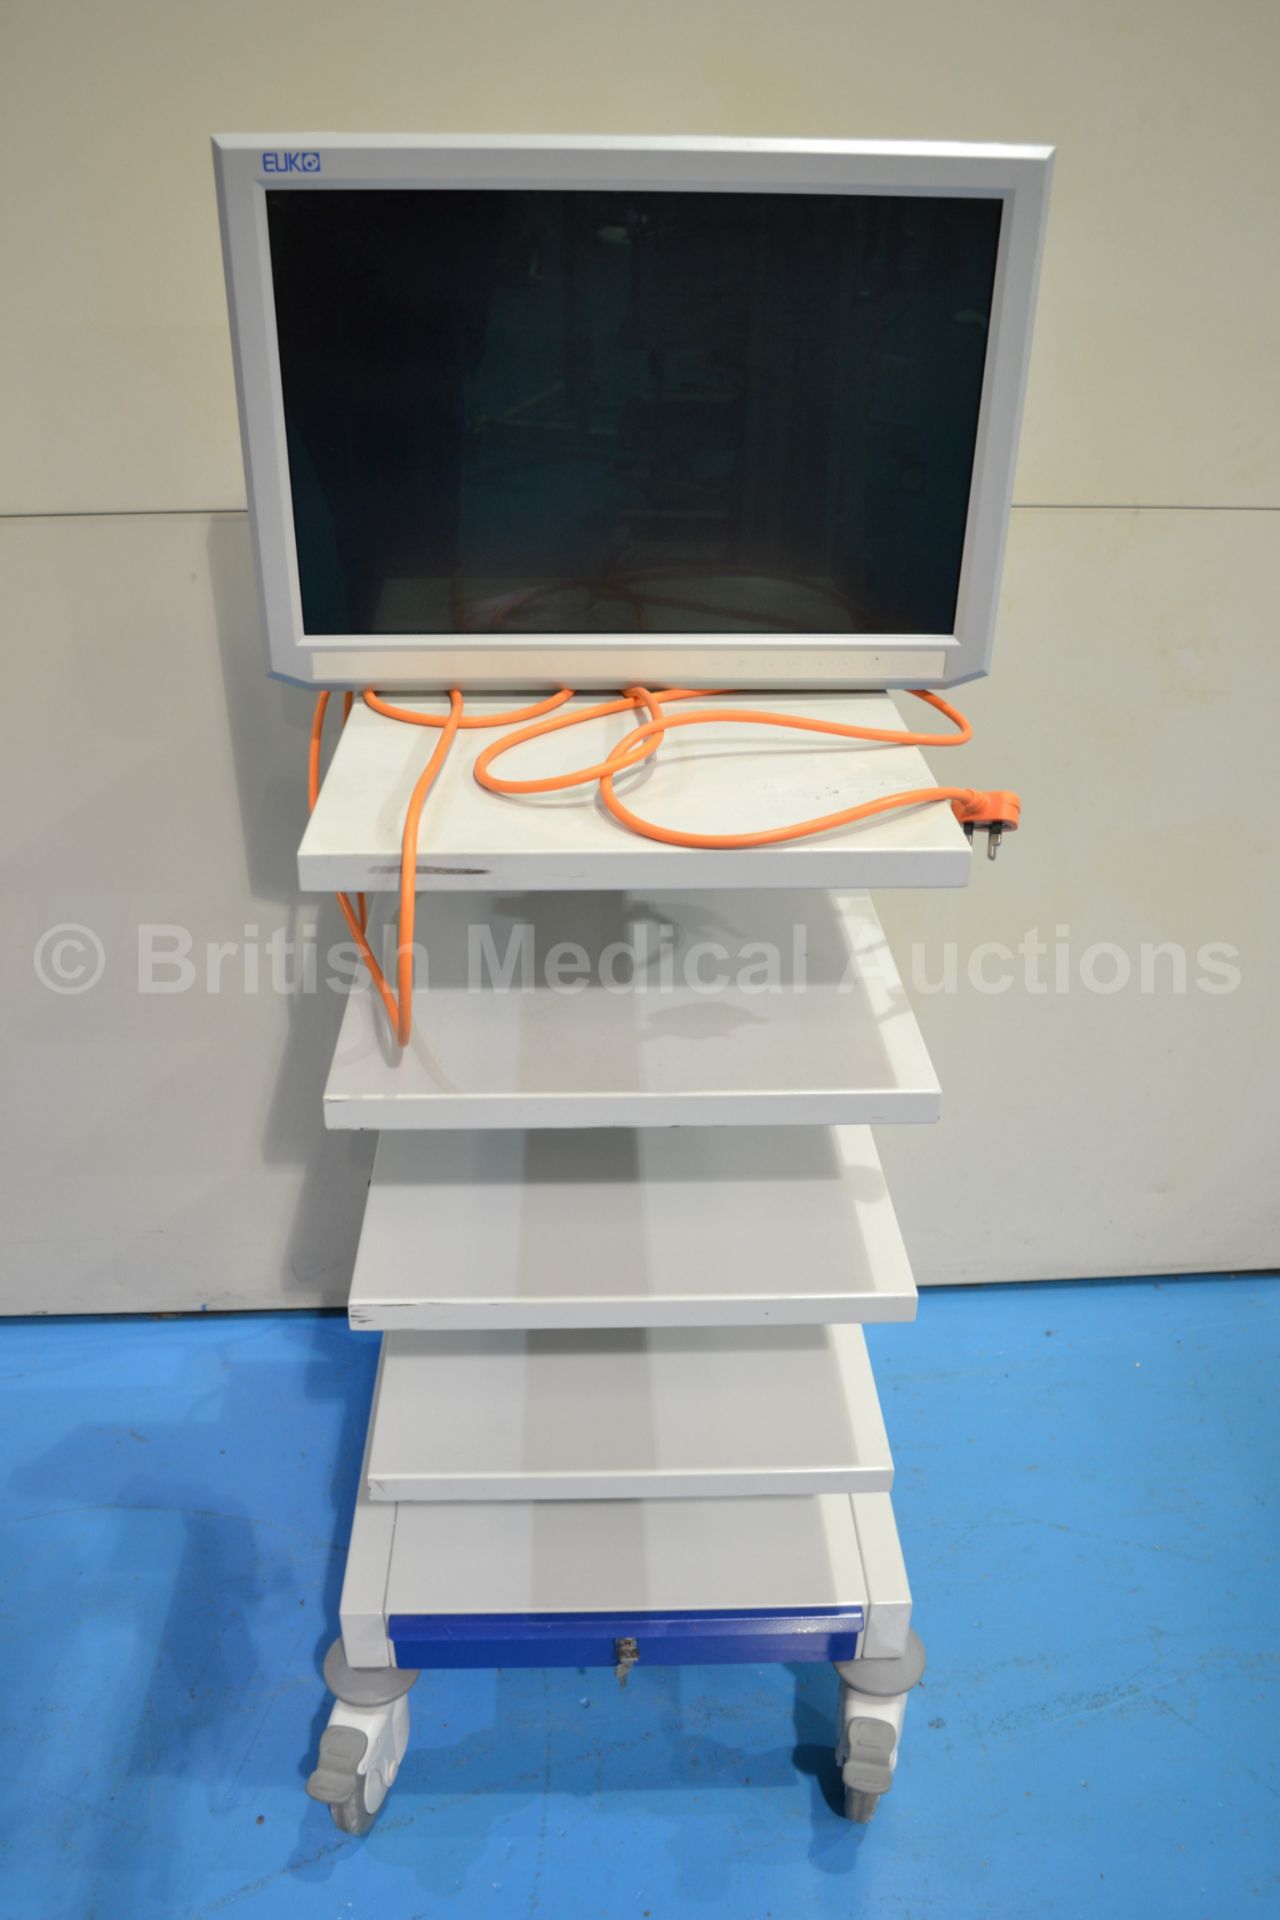 EUK Endoscopy Stack System Trolley with Monitor